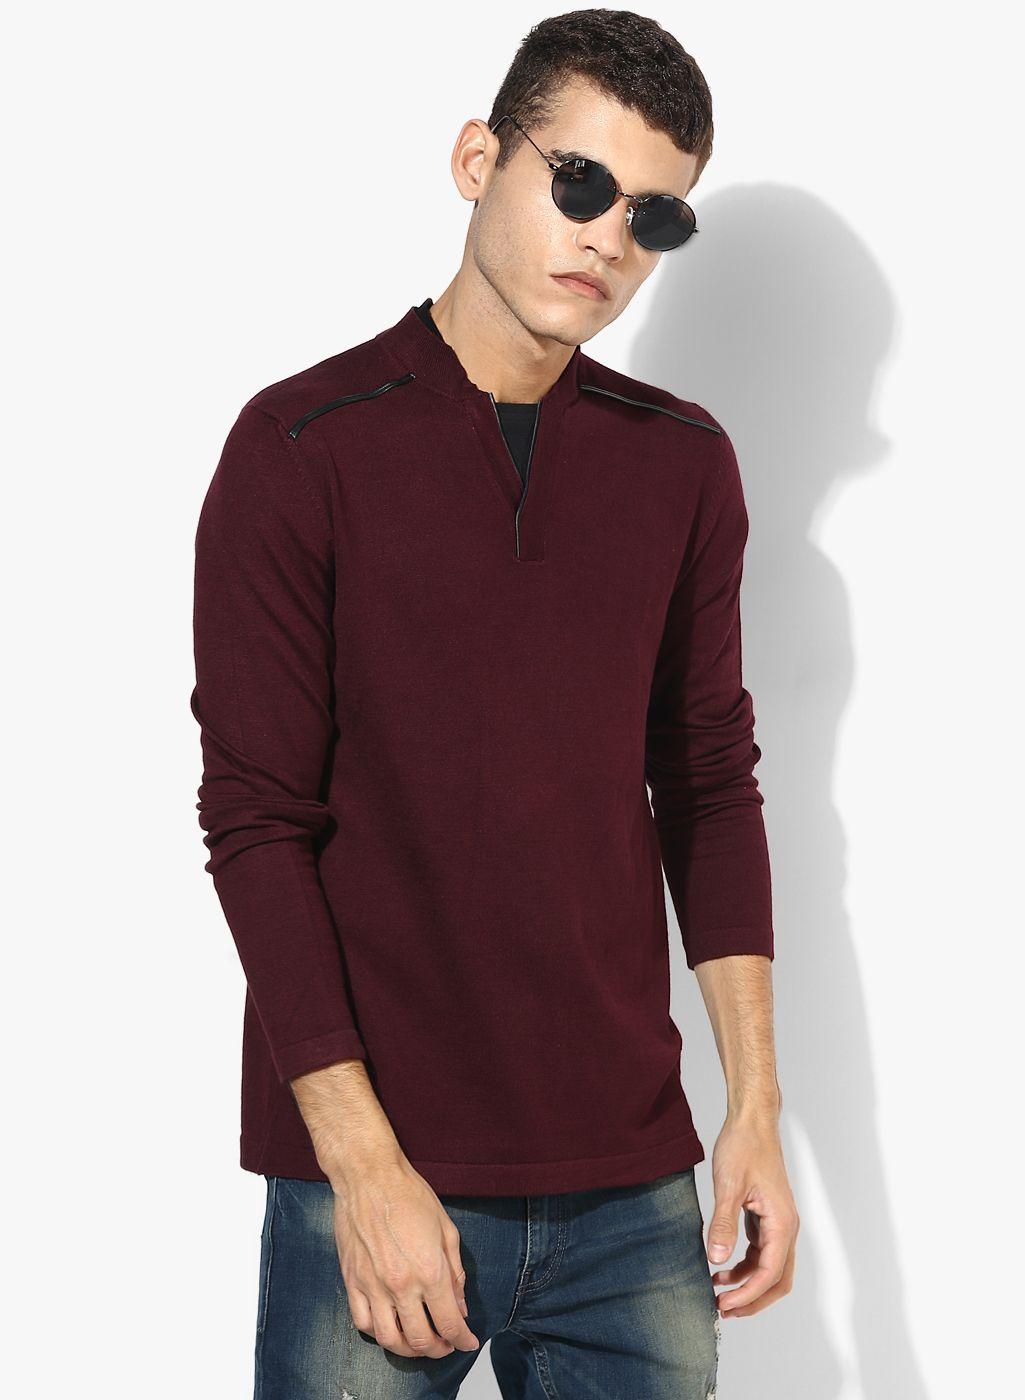 maroon-solid-sweater